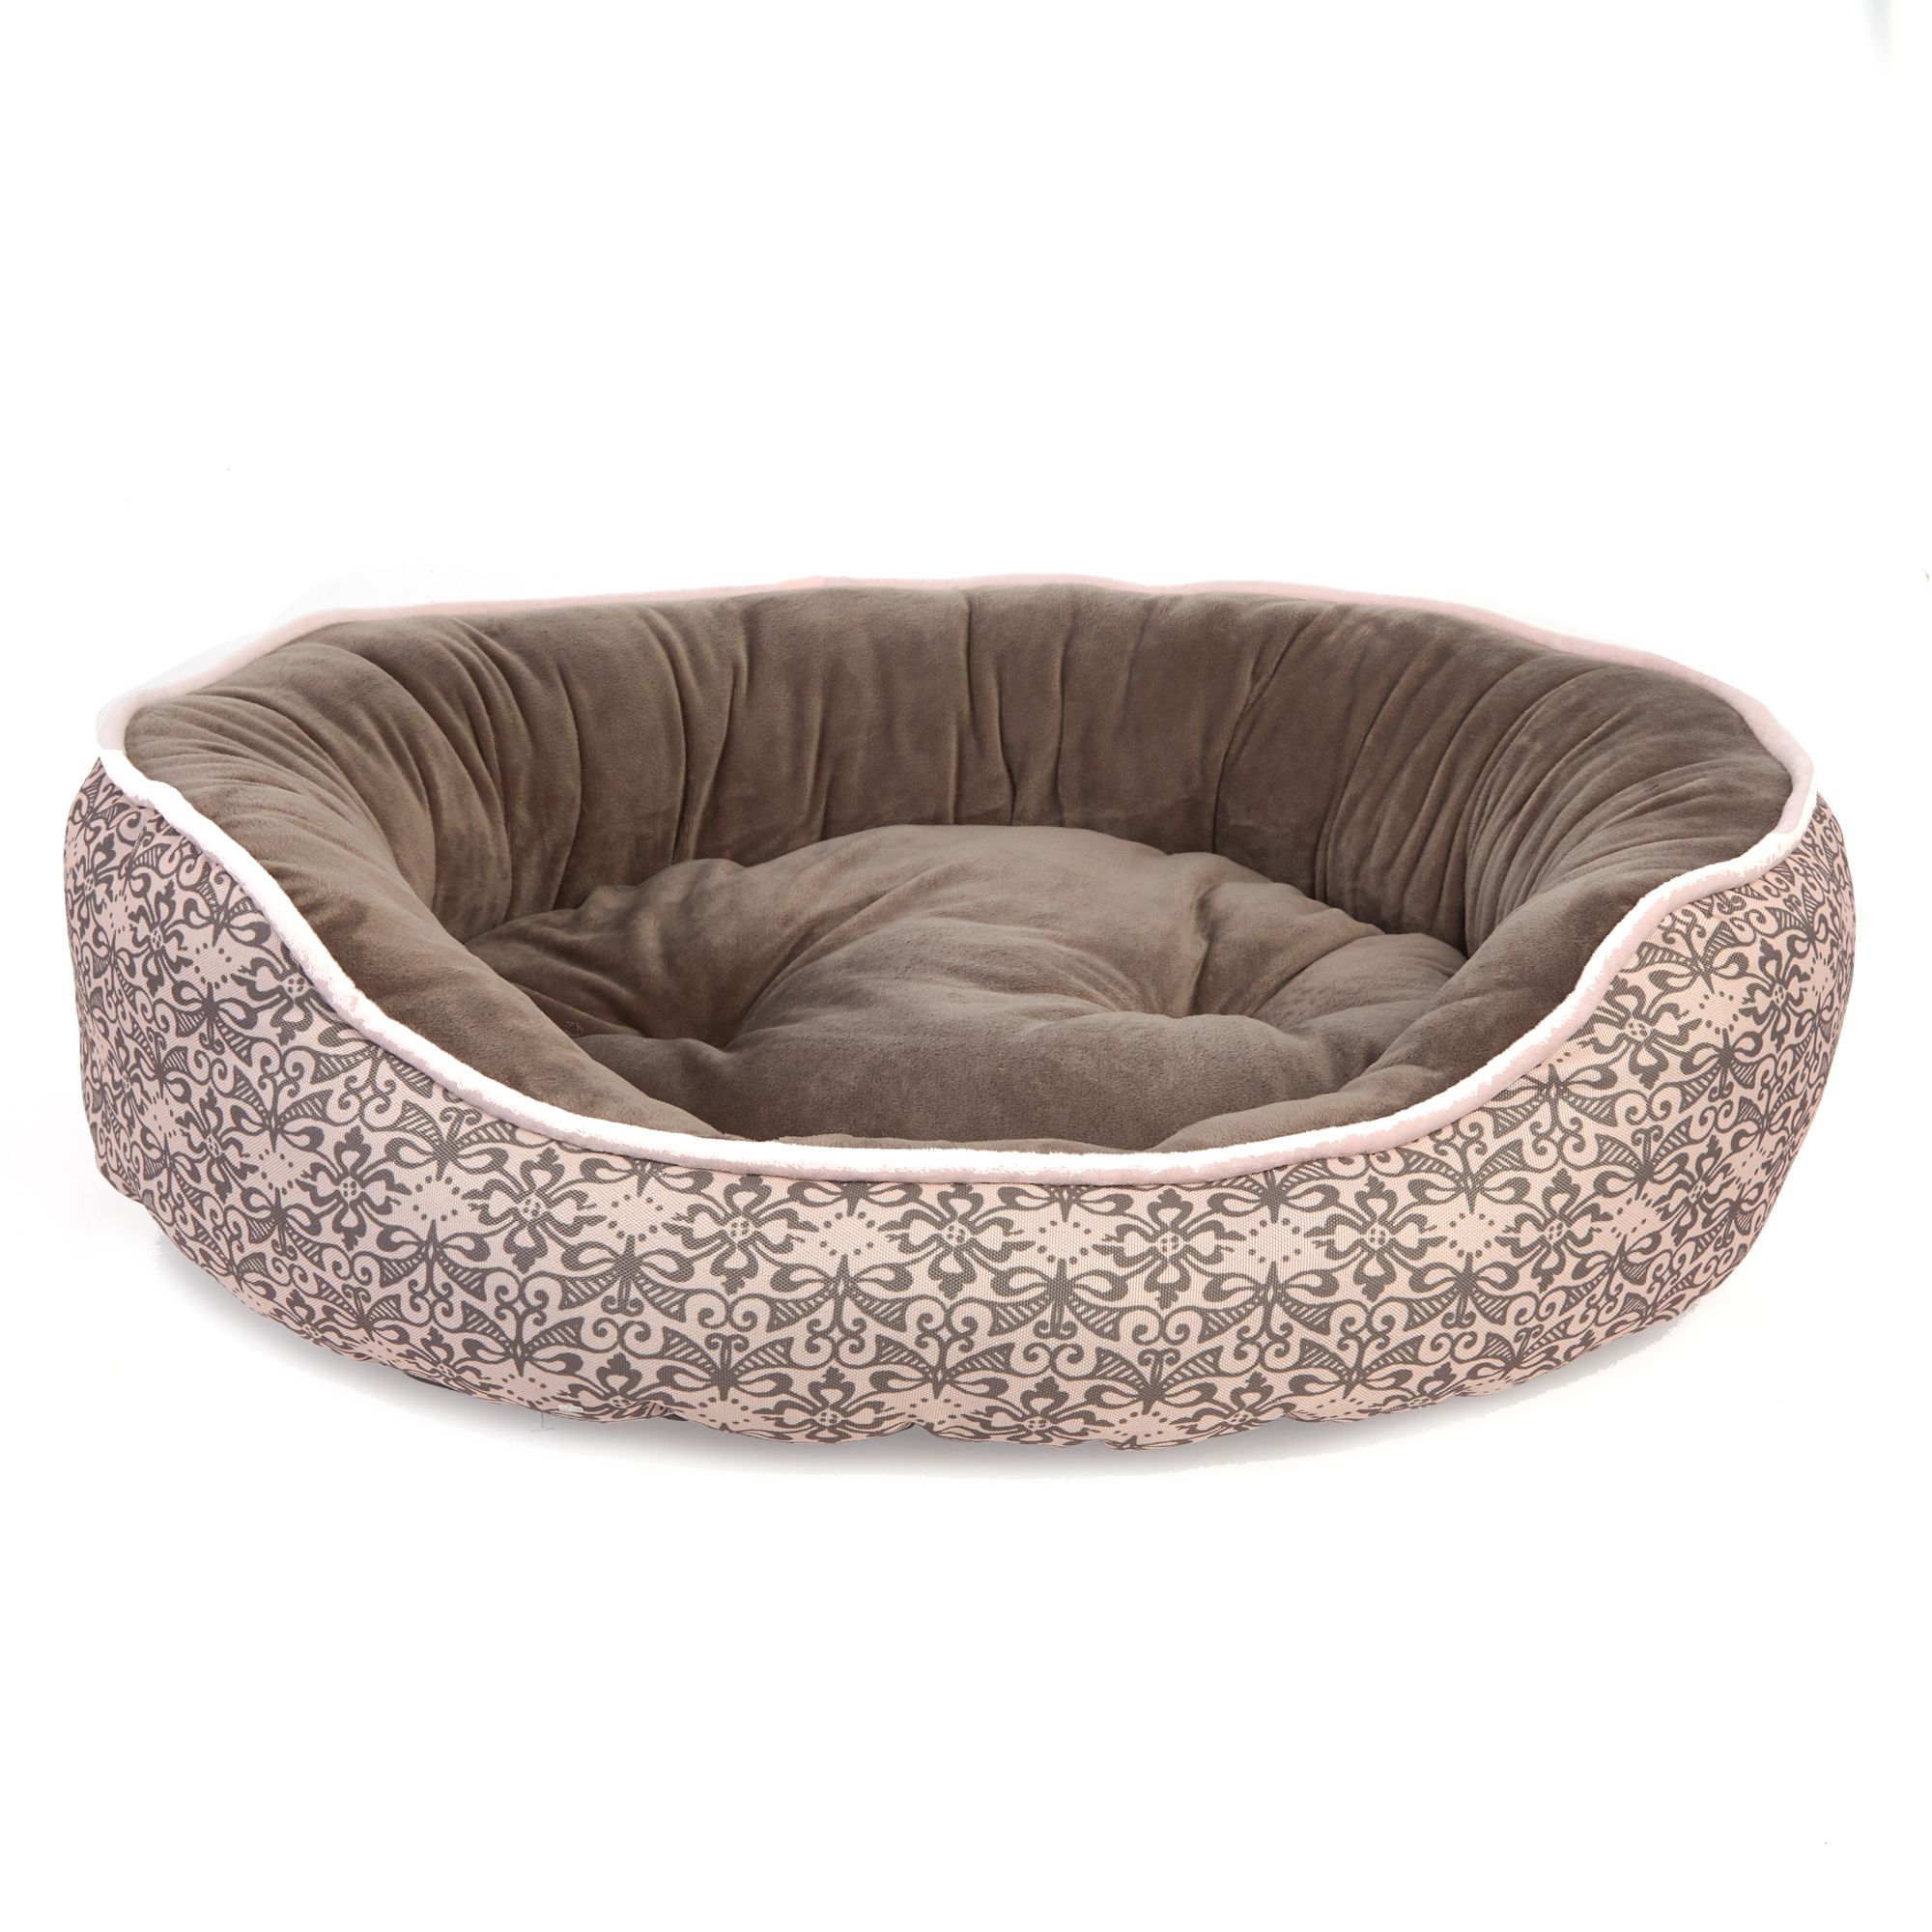 Luxury Dog Beds: Couches, Bolster Beds & Cuddlers | PetSmart